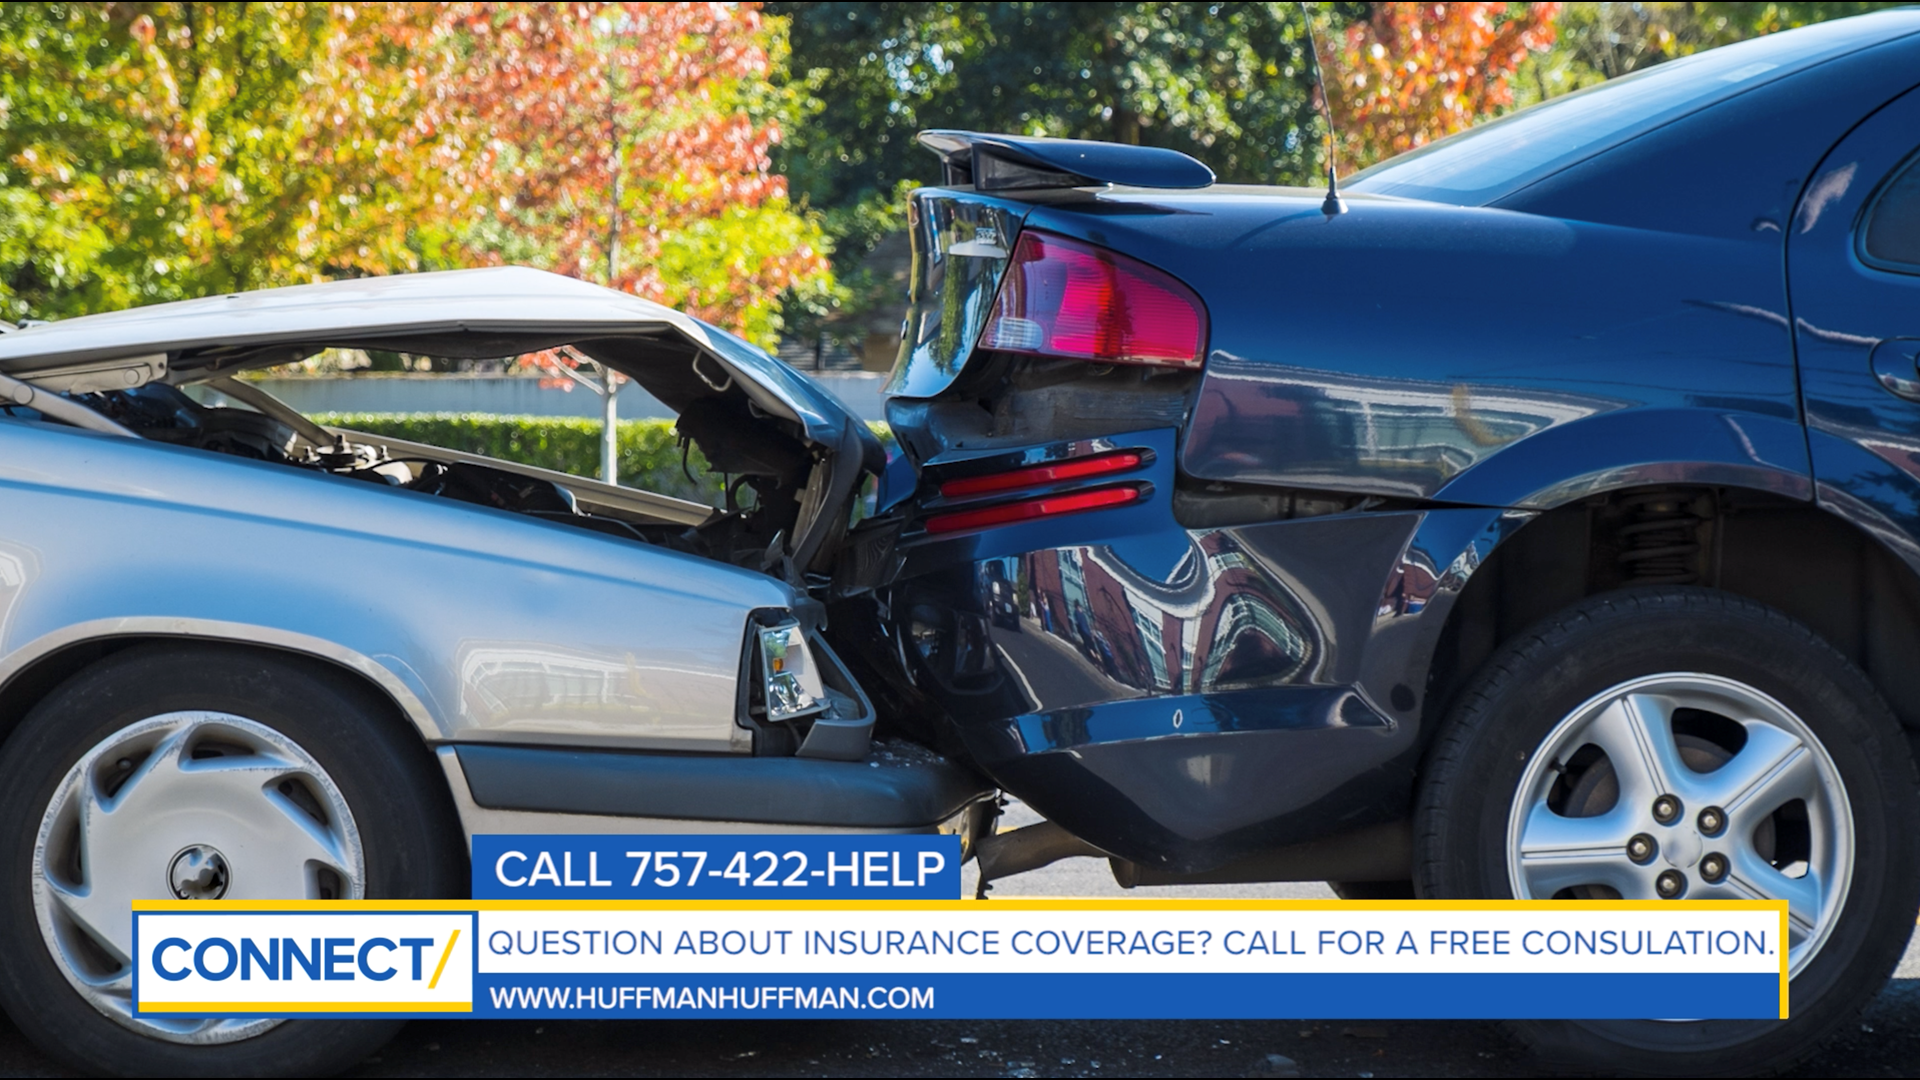 Many people don't realize they don't have enough car insurance coverage until they get in an accident and are stuck with medical and repair bills.